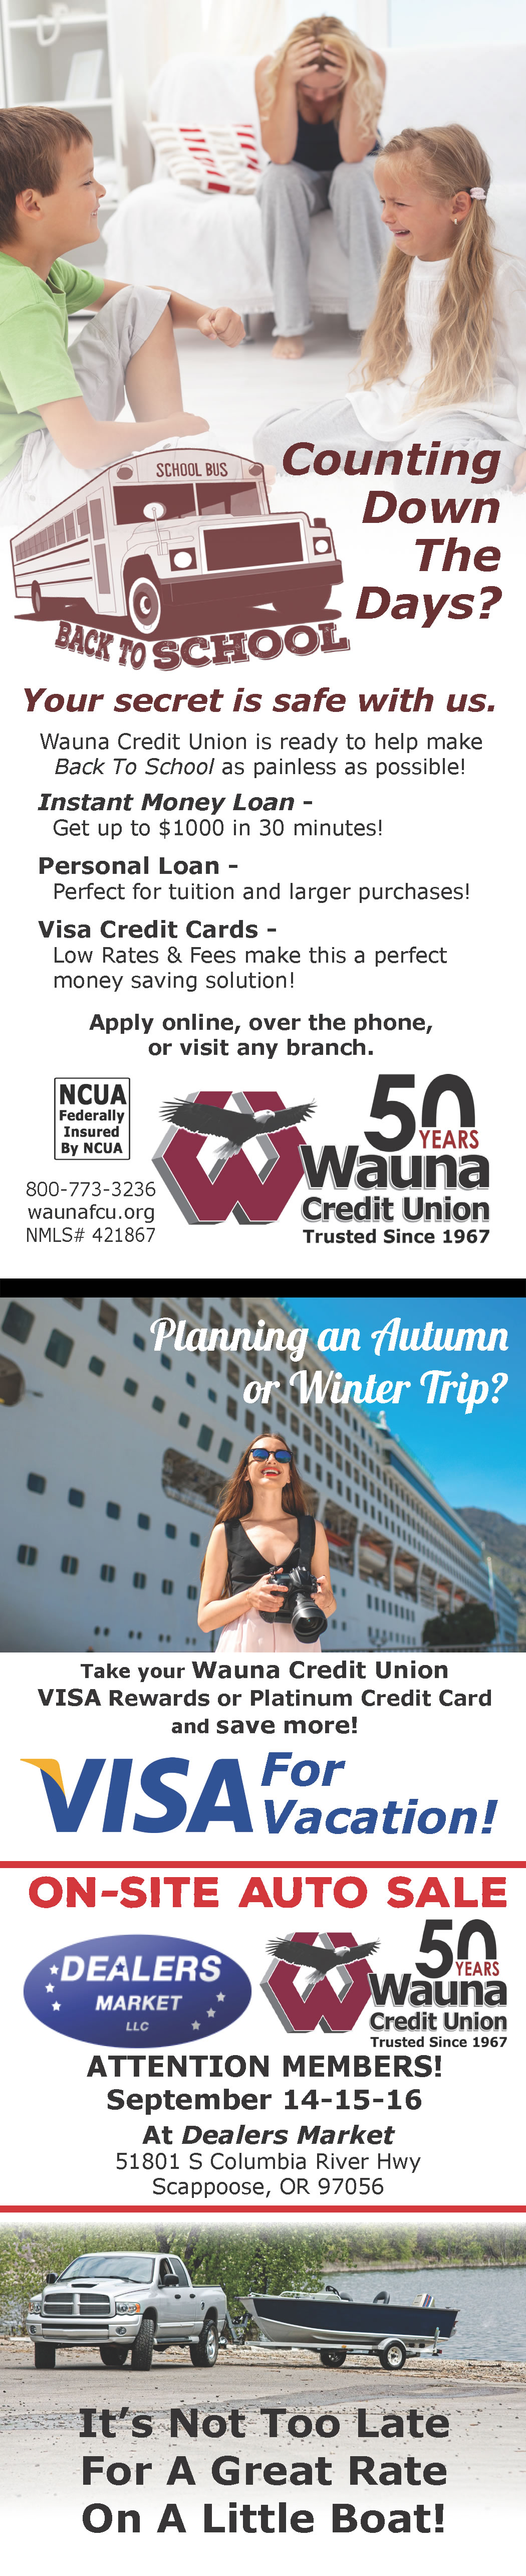 Back To School Counting Down the Days Your Secret is safe with us Wauna Credit Union is ready to help make Back to School as painless as possible! Instant Money Loan Get up to $1000 in 30 minutes! Personal Loan Perfect for tuition and larger purchases! Visa Credit Cards Low Rates & Fees make this a perfect money saving solution! Apply online, over the phone, or visit any branch. NCUA Federally Insured by NCUA 800-773-3236 waunafcu.org NMLS # 421867 Planning an Autumn or Winter Trip Take your Wauna Credit Union VISA Rewards or Platinum Credit Card and save more! VISA for Vacation! On-Site Auto Sale Wauna Credit Union Dealers Market LLC Attention Members! September 14 15 and 16 At Dealers Market 51801 S Columbia River Hwy Scappoose, OR 97056 It's Not Too Late For A Great Rate On A Little Boat!